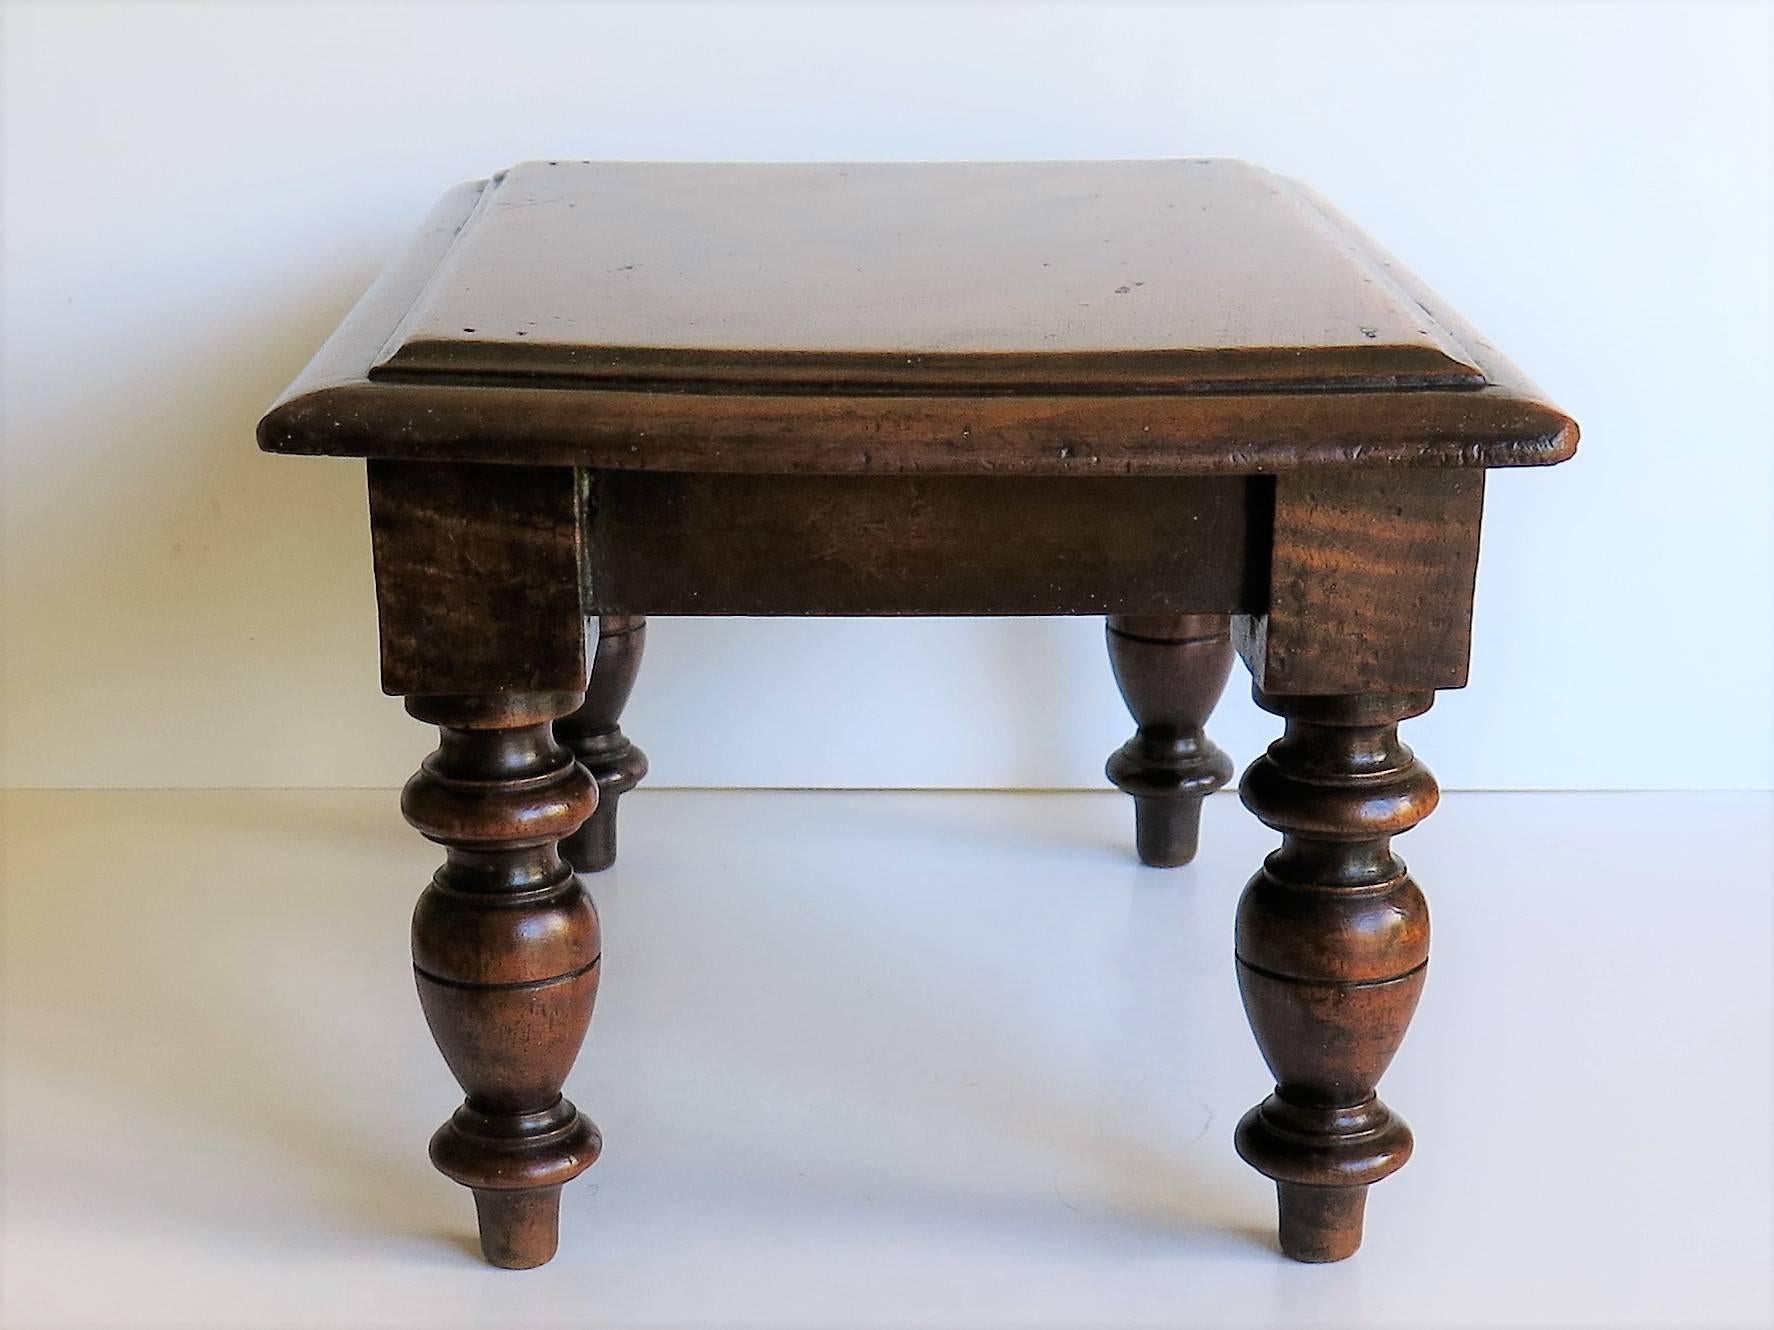 Great Britain (UK) Early Victorian, Low Stand or Stool, Mahogany, Turned Legs, English, circa 1840